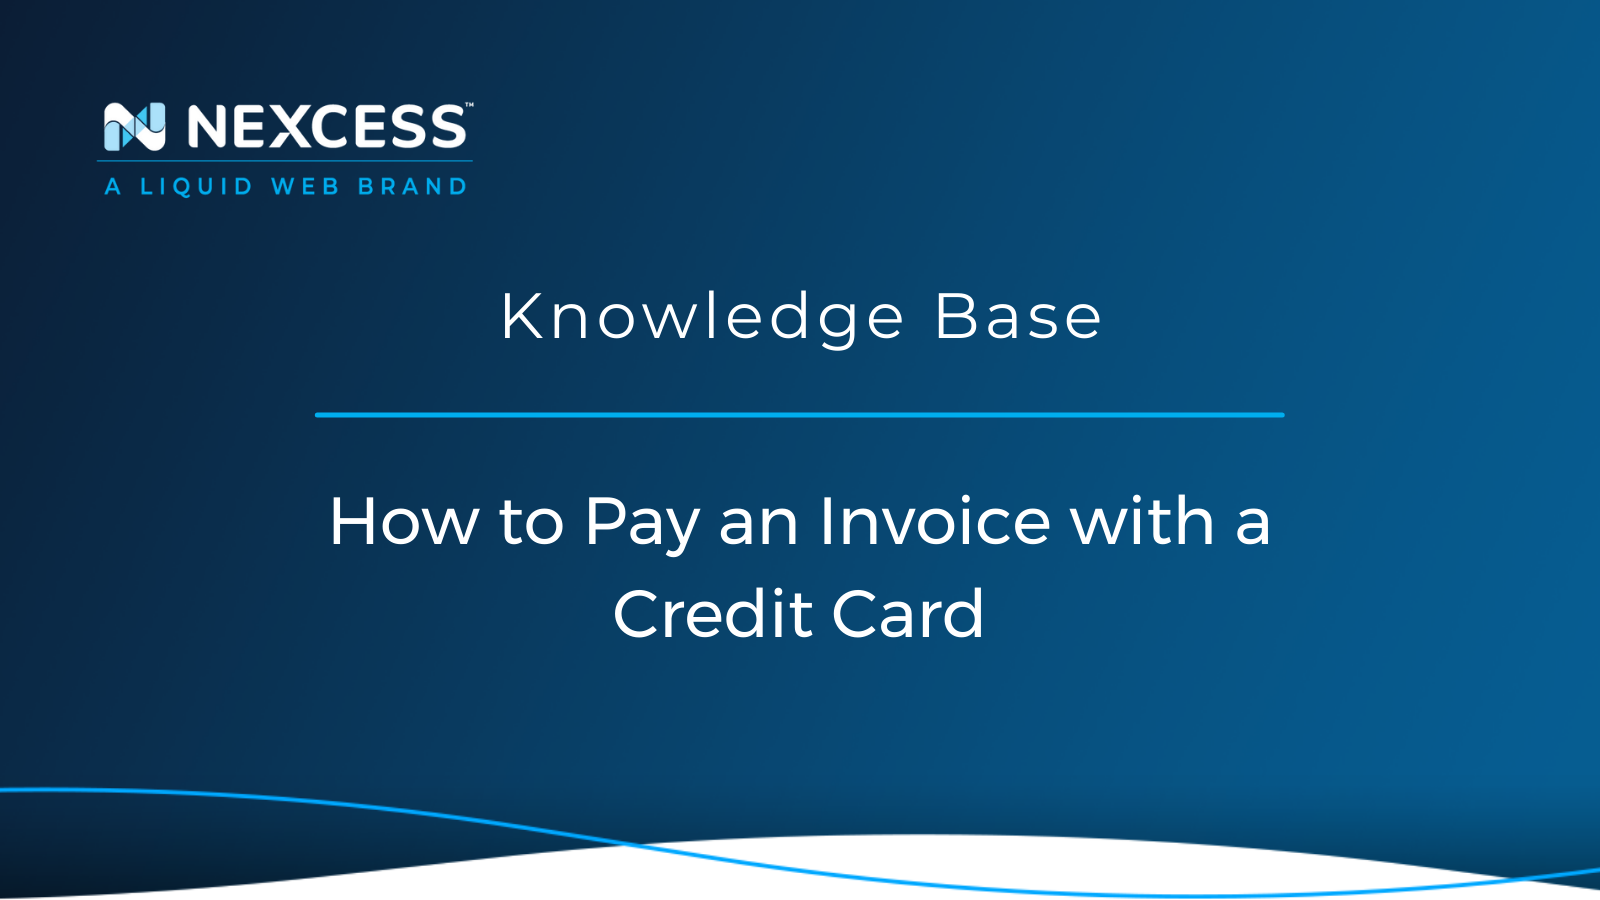 How to Pay an Invoice with a Credit Card